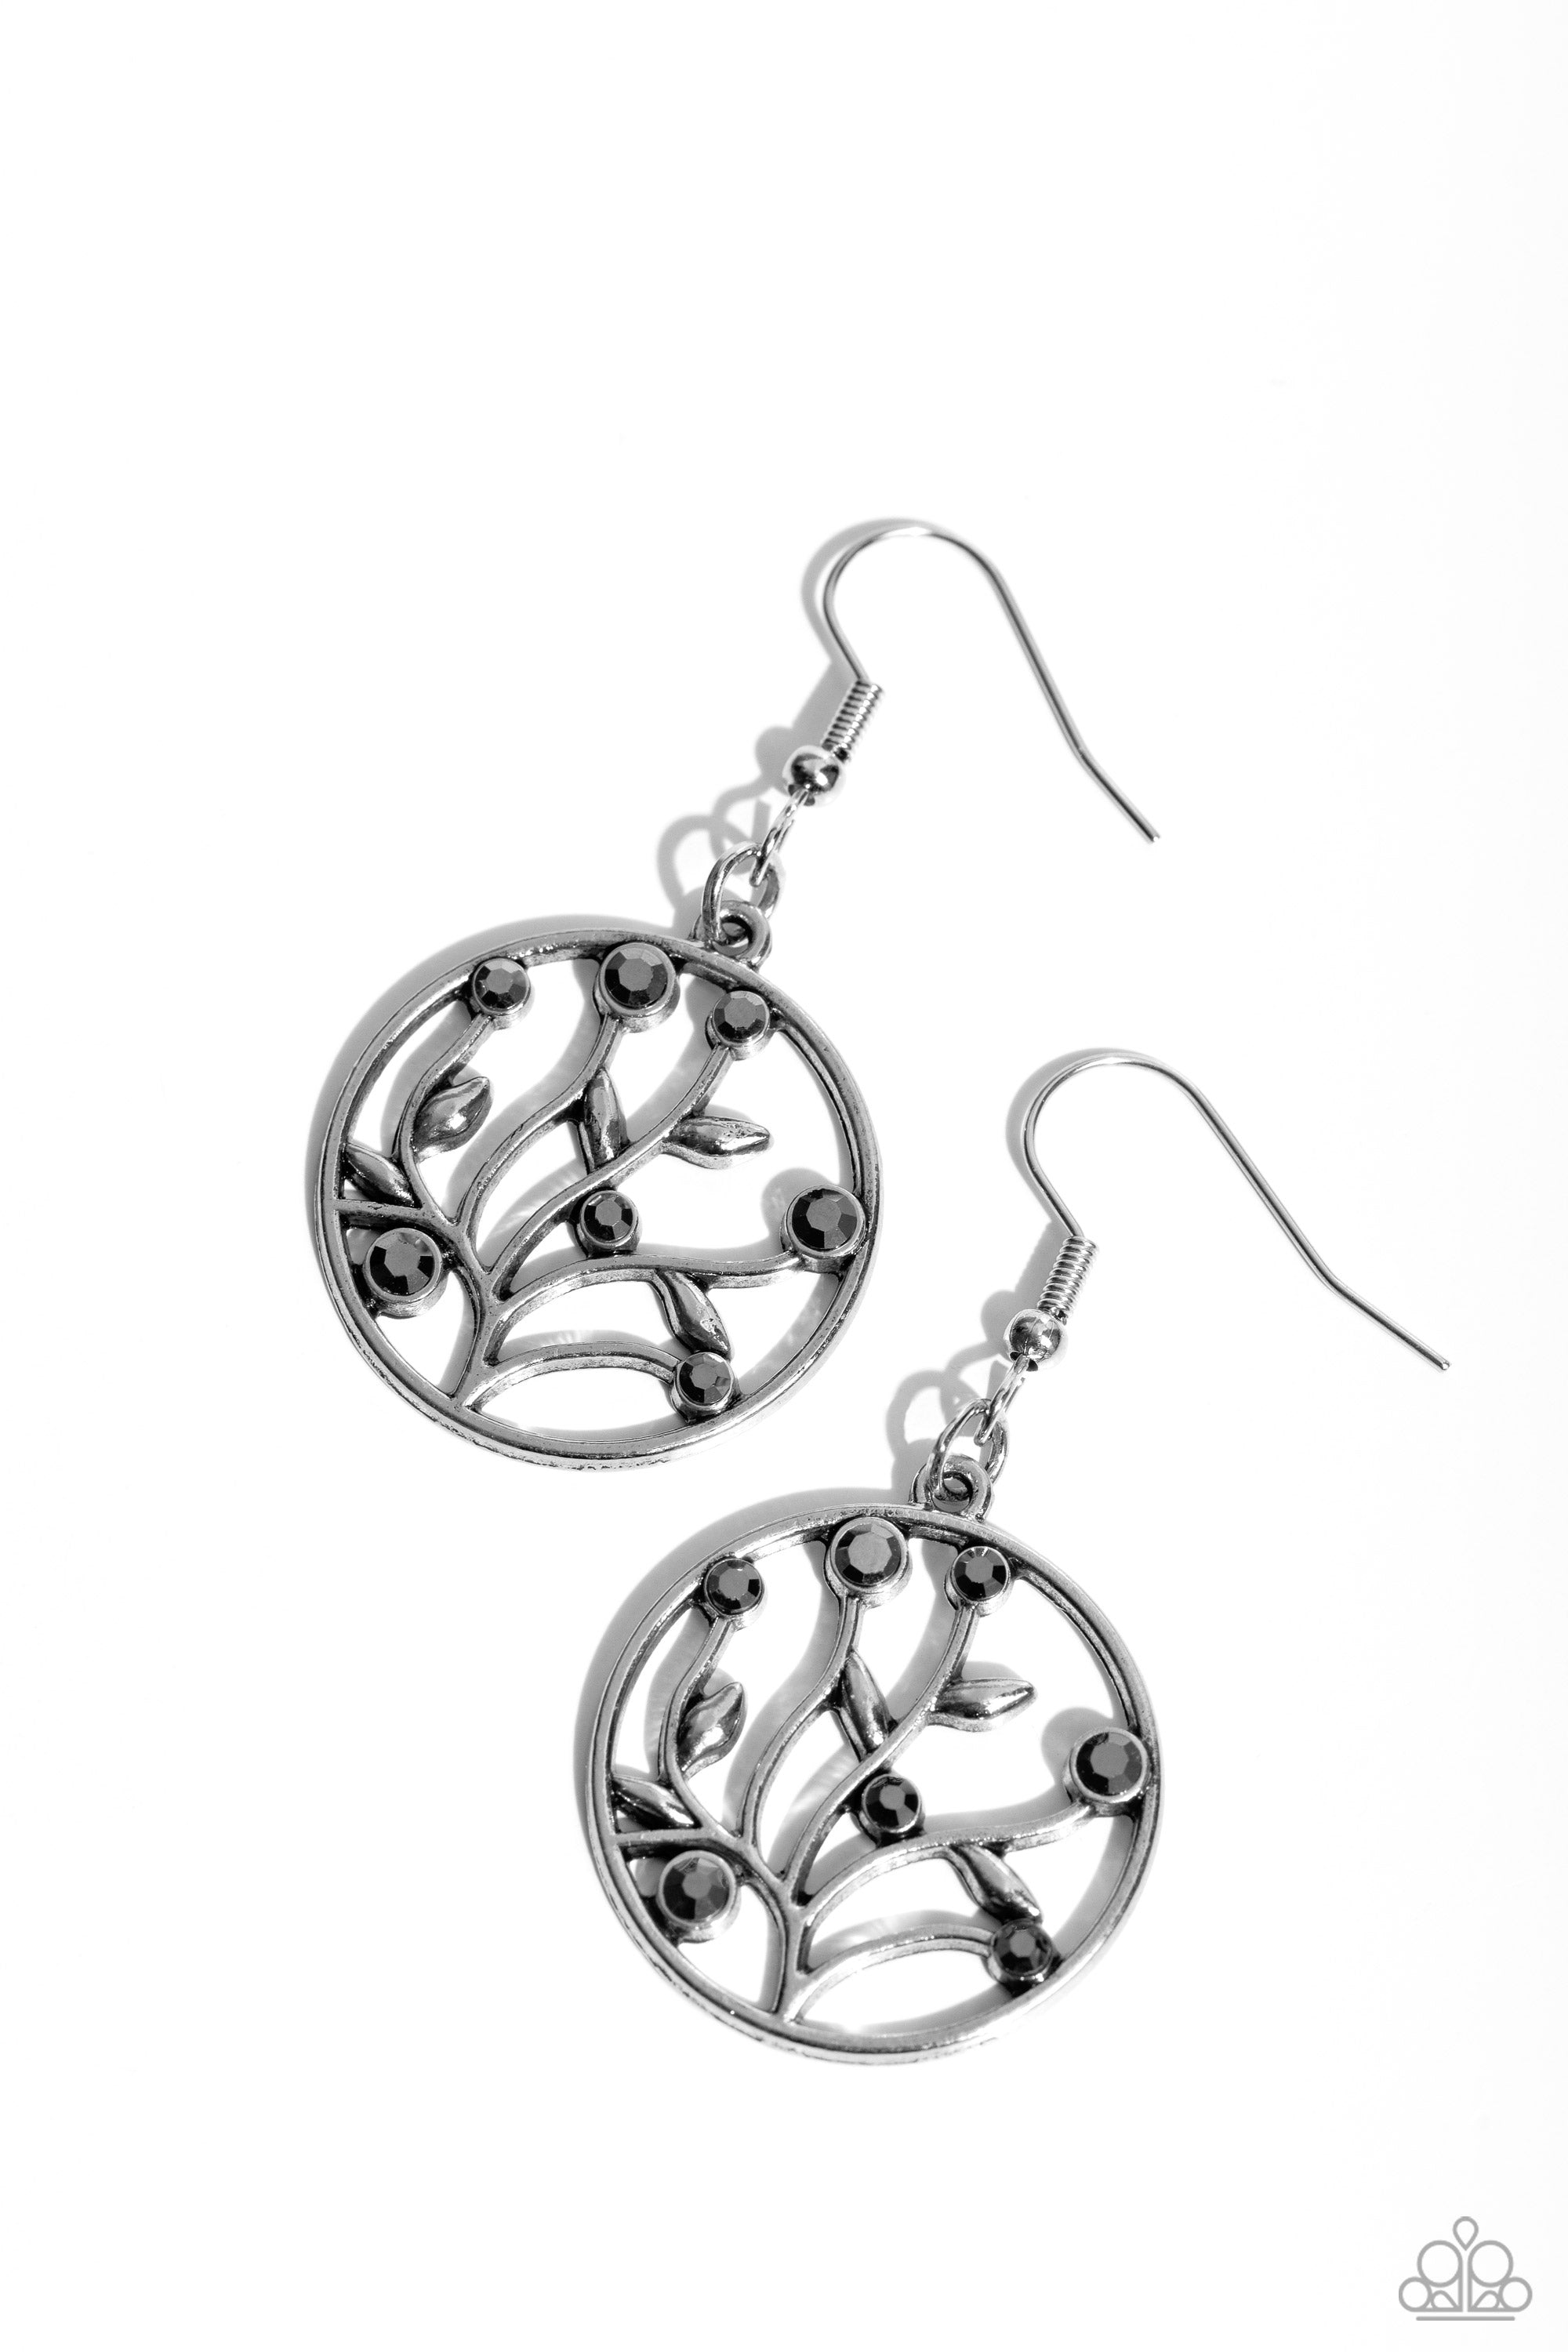 Bedazzlingly Branching Silver Earrings - Paparazzi Accessories- lightbox - CarasShop.com - $5 Jewelry by Cara Jewels